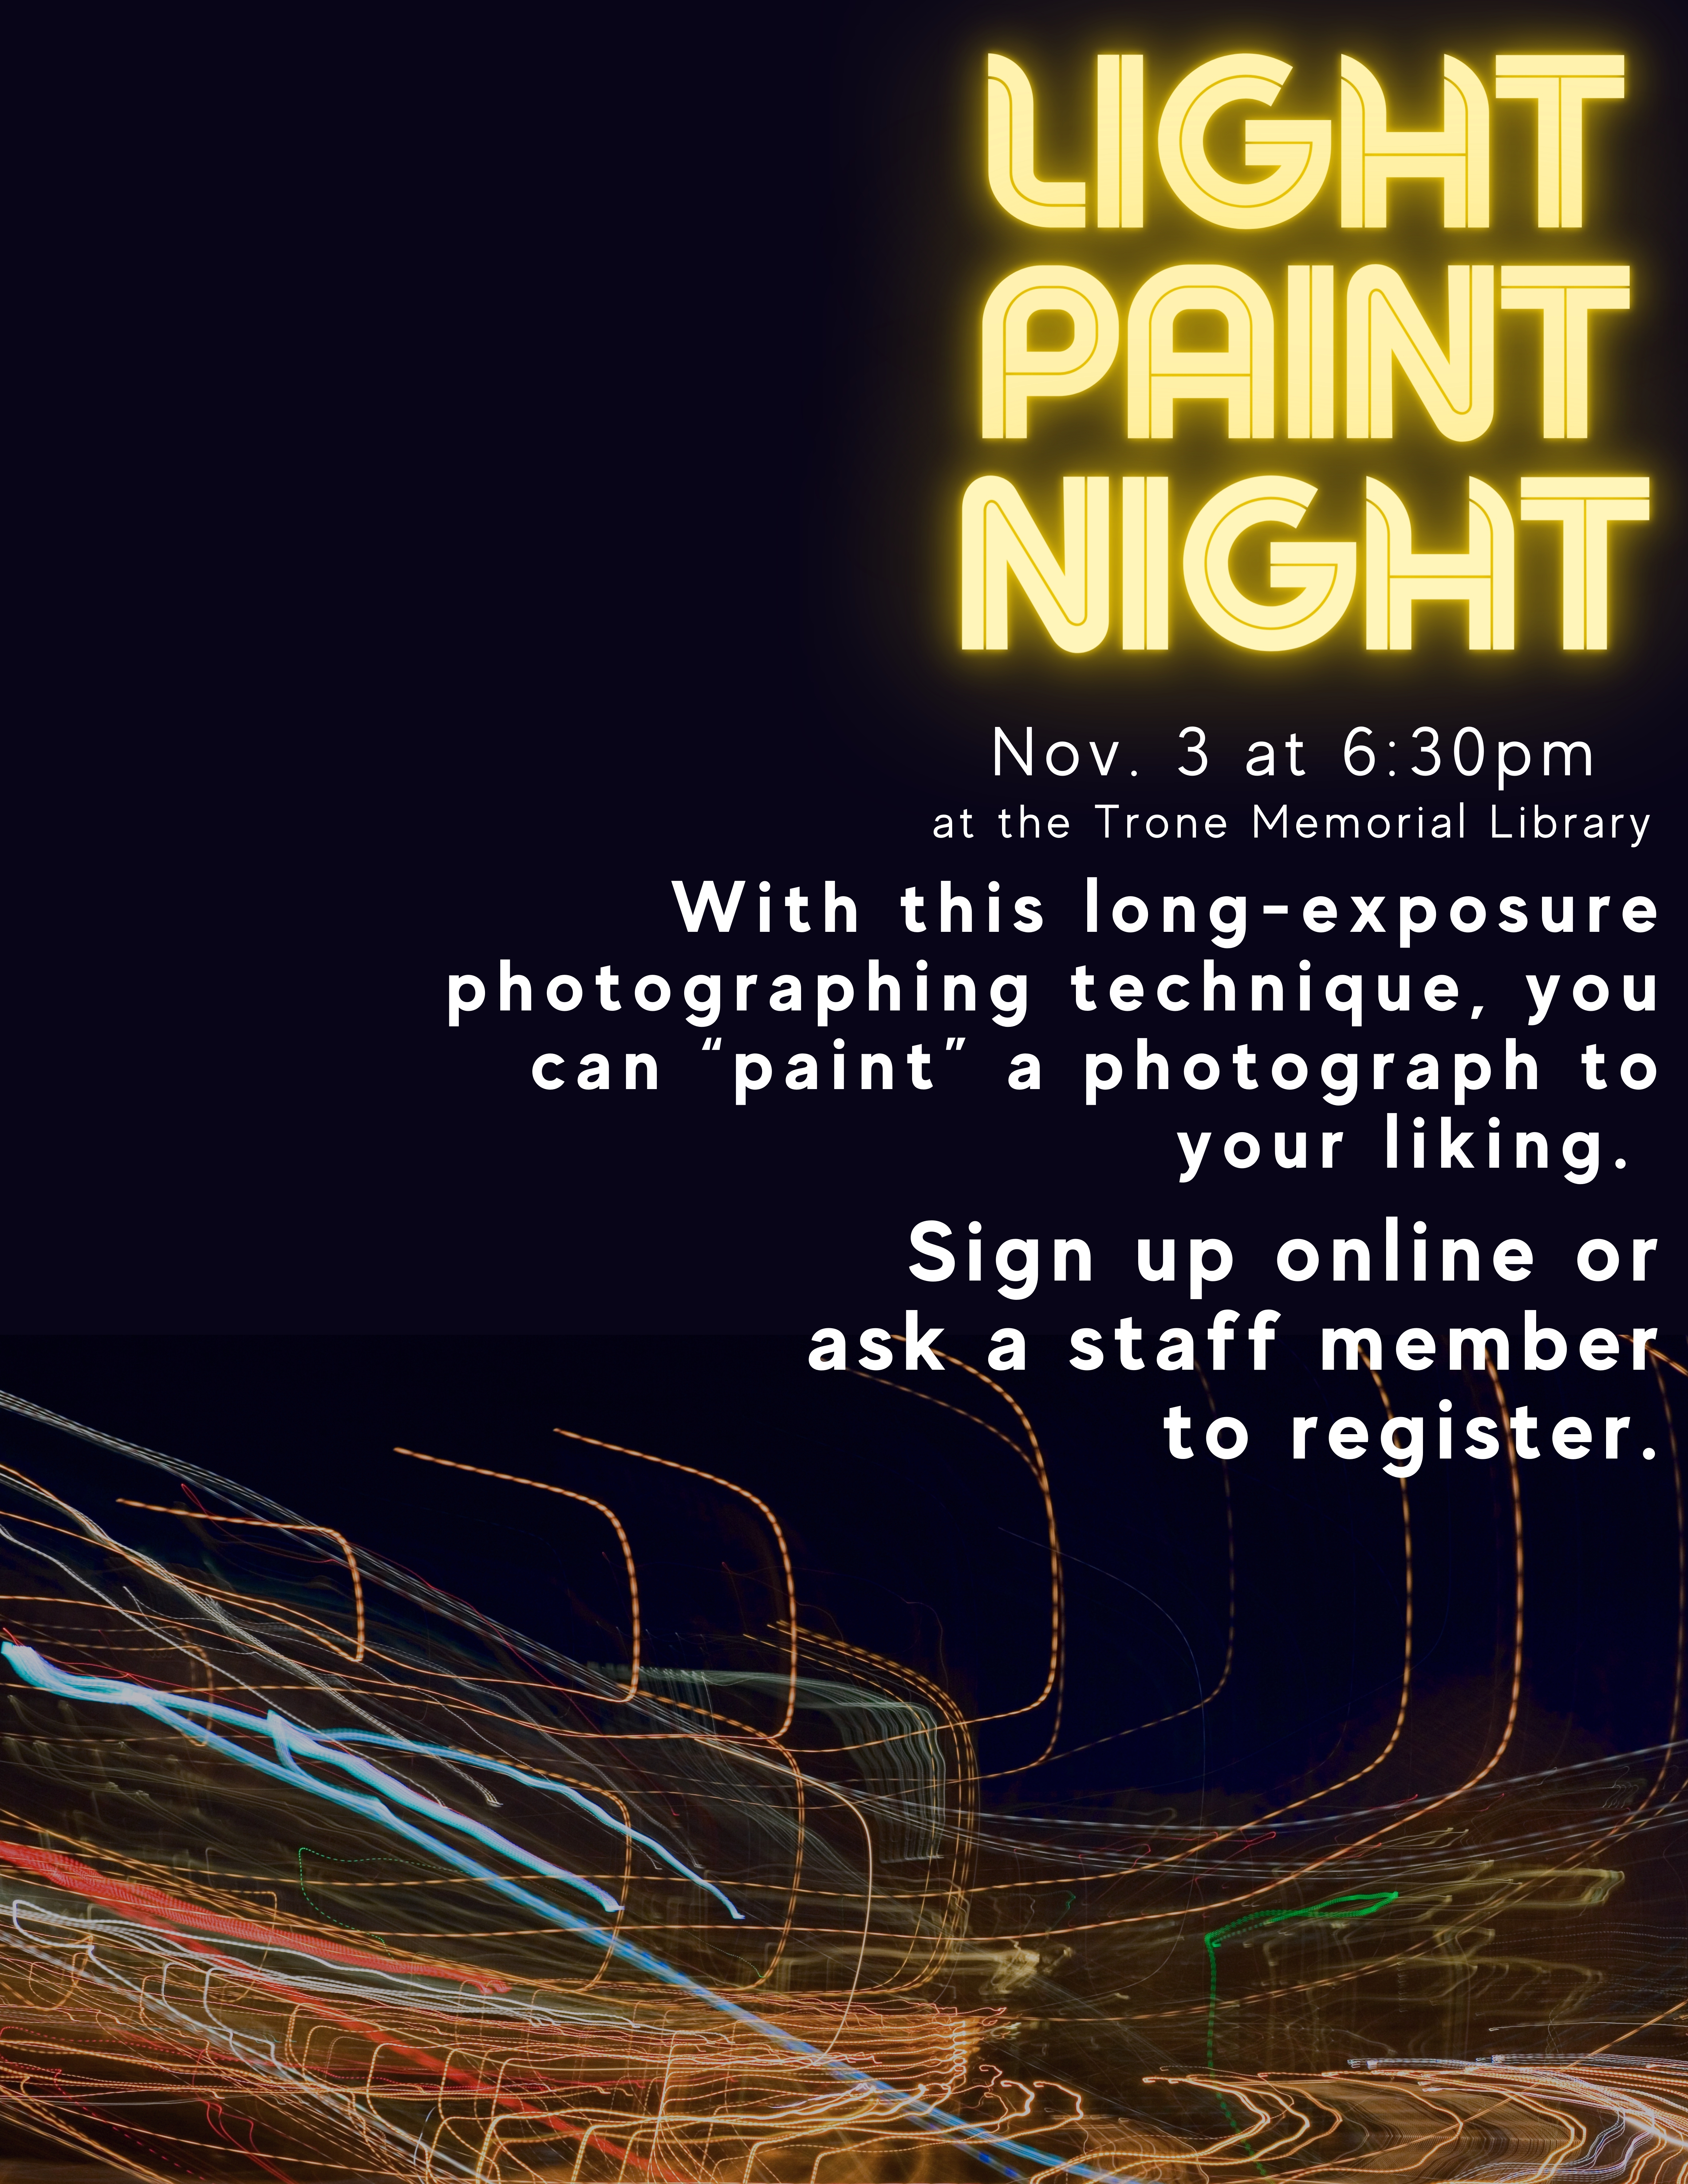 Black background with streaks of colored light. Text reads: Light Paint Night. Nov. 3rd at 6:30pm at the Trone Memorial Library. With this long-exposure photographing technique, you can “paint” a photograph to your liking. Sign up online or ask a staff member to register.